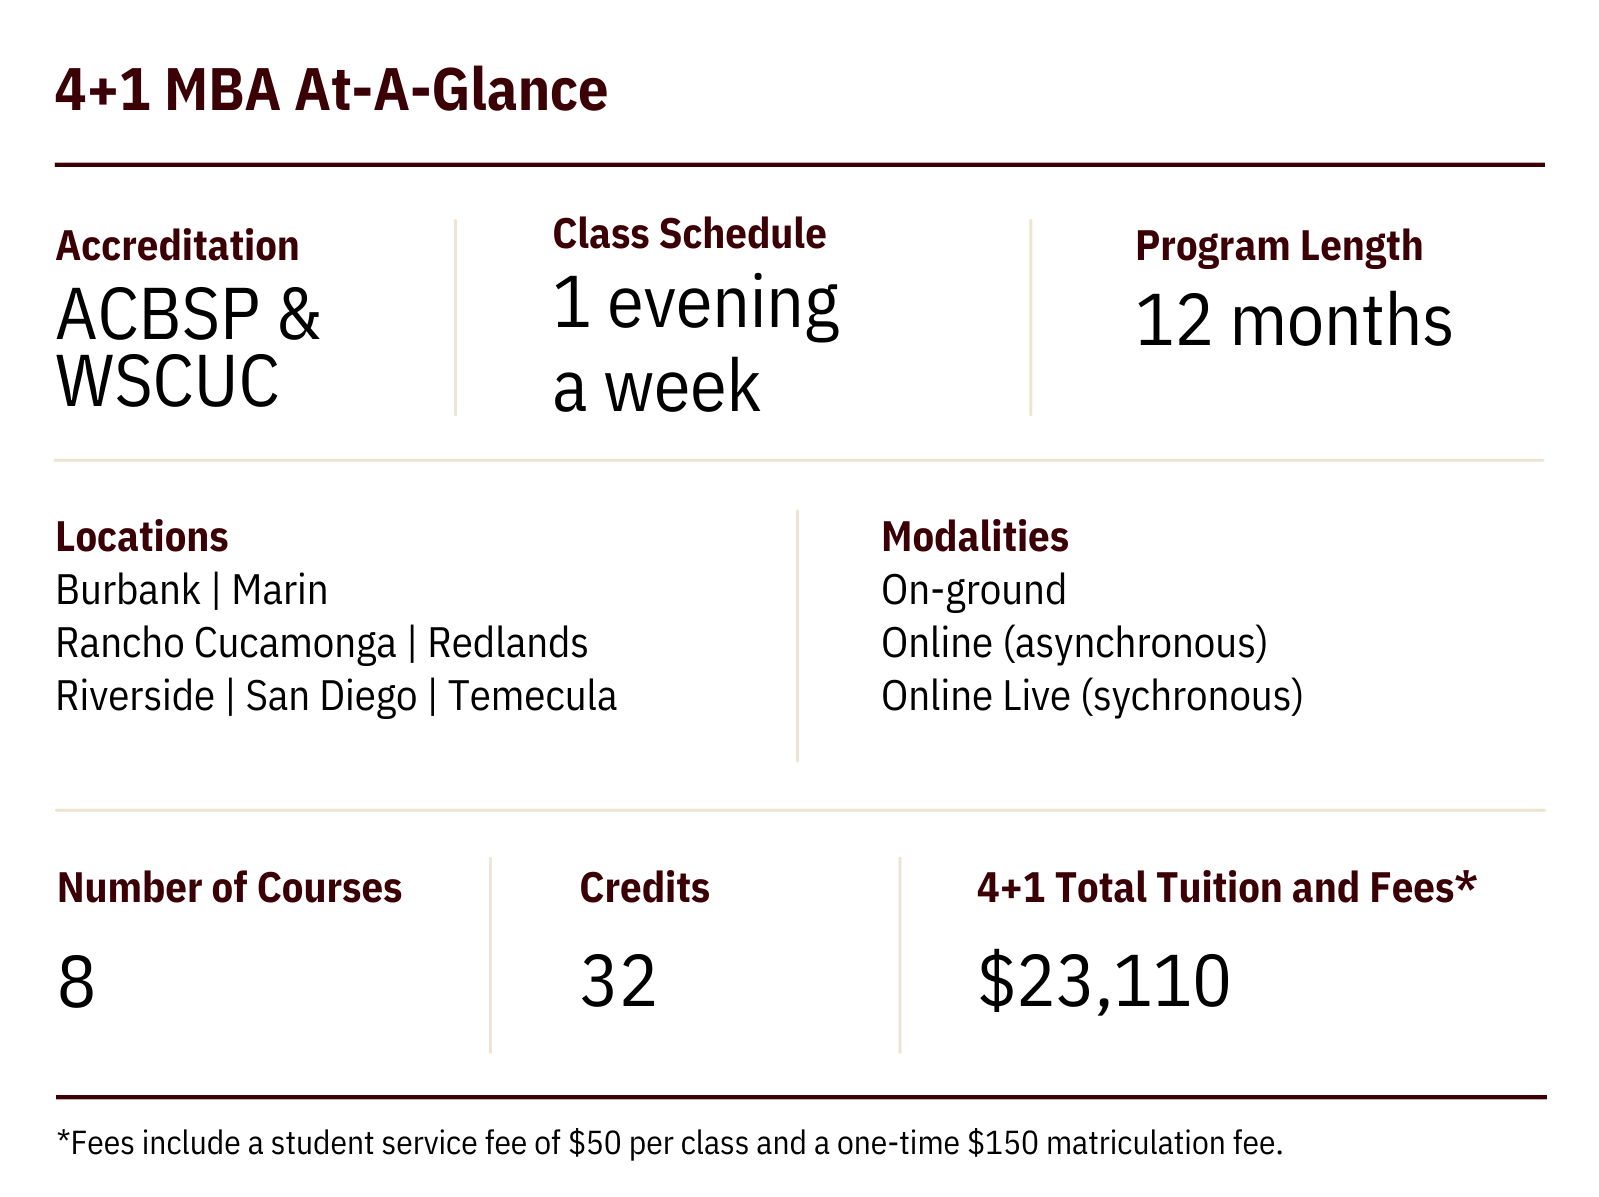 4+1 MBA at a glance.png